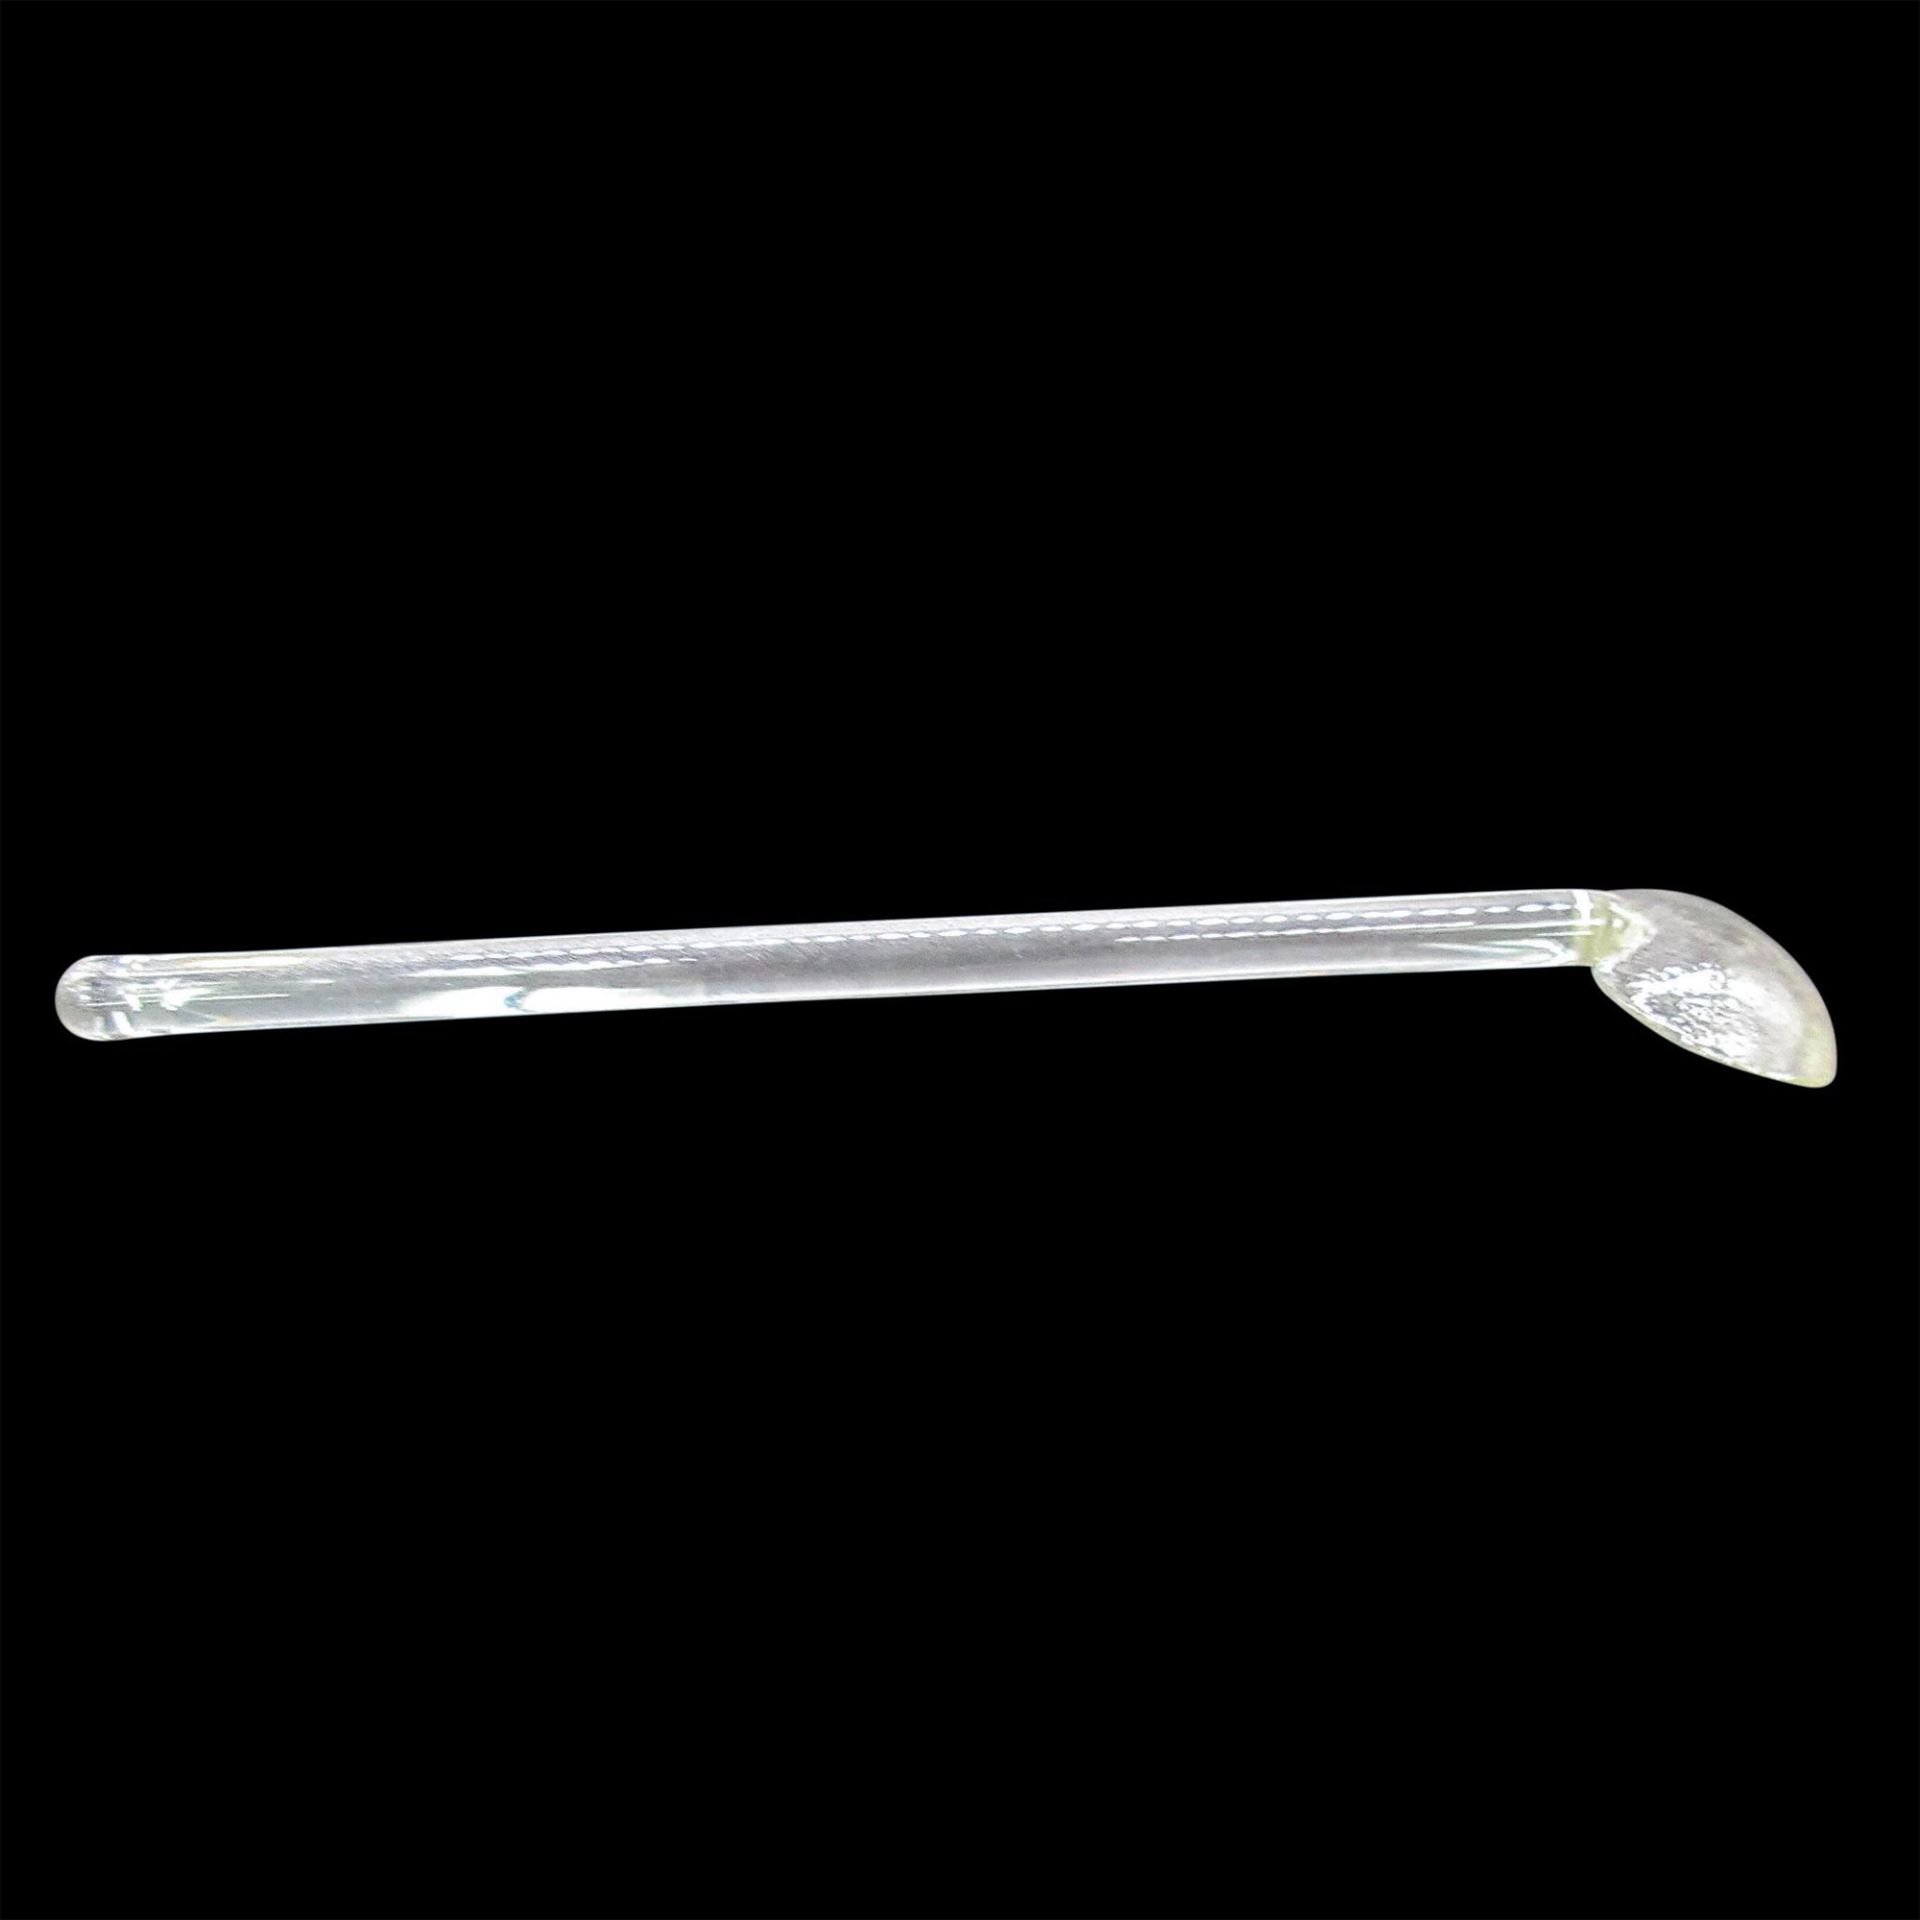 5pc Small Glass Ladles - Image 16 of 16